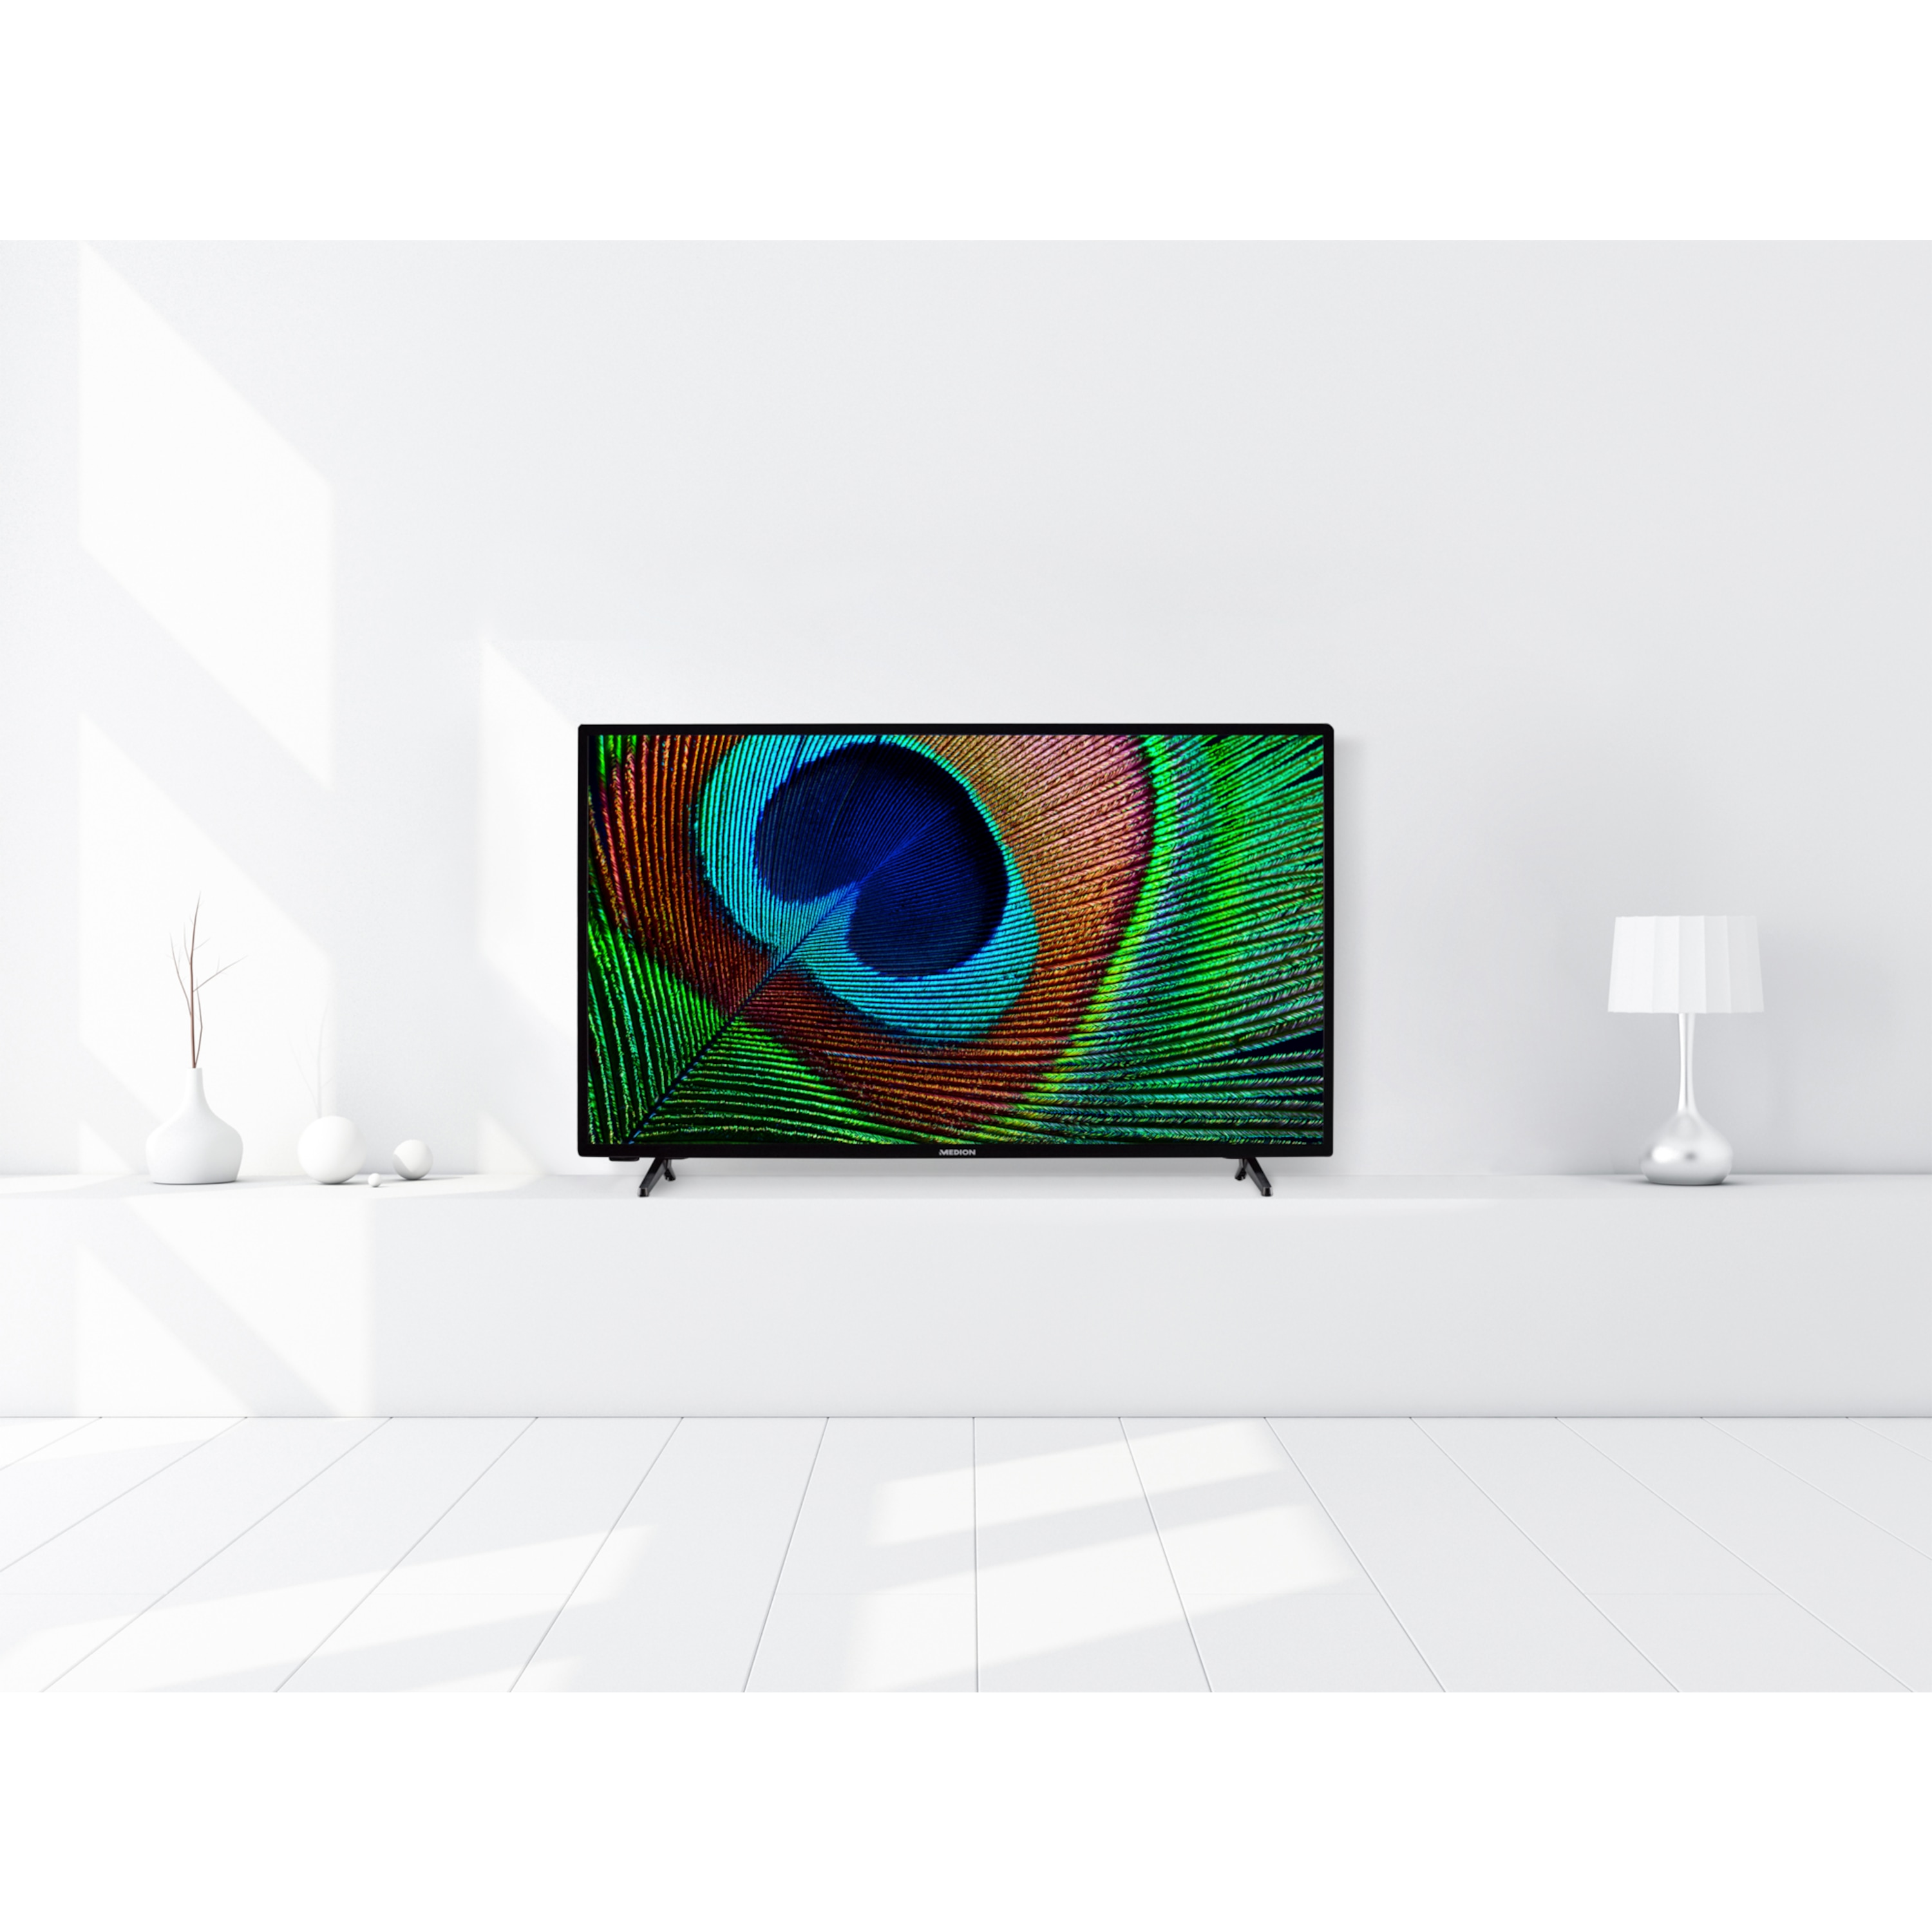 MEDION P14093 Full HD Fernseher (Flat, Android) 40 100,3 100,3 Android Fernseher cm, / HDR 39,5 TV cm, mit HD, Zoll, TV Zoll Netflix Smart